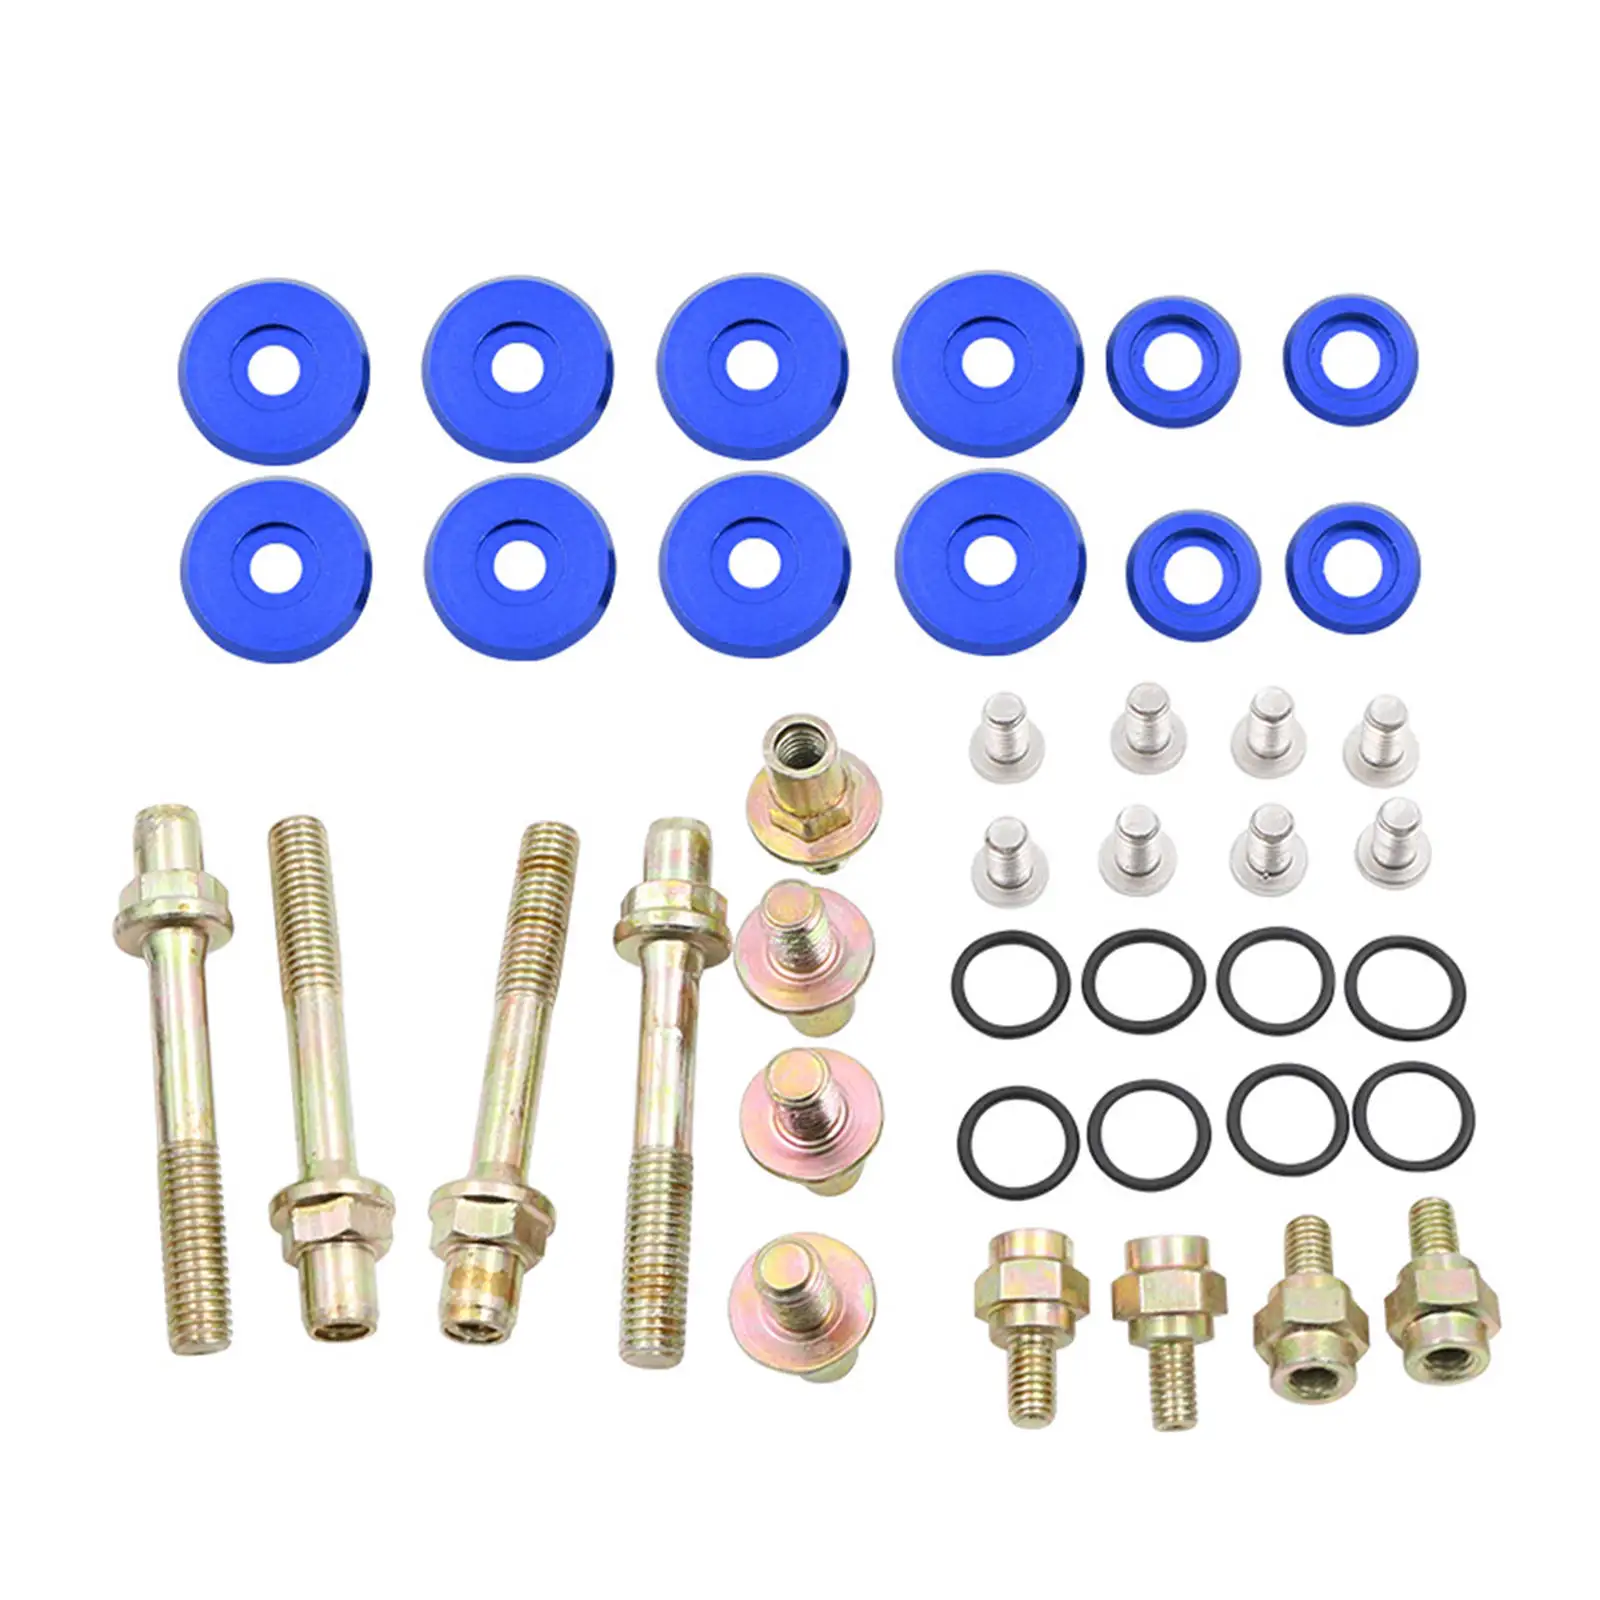 Engine Valve Cover Washer Bolt Kit for Honda B16A2 B16A3 B17A1 Replaces Easy to Install